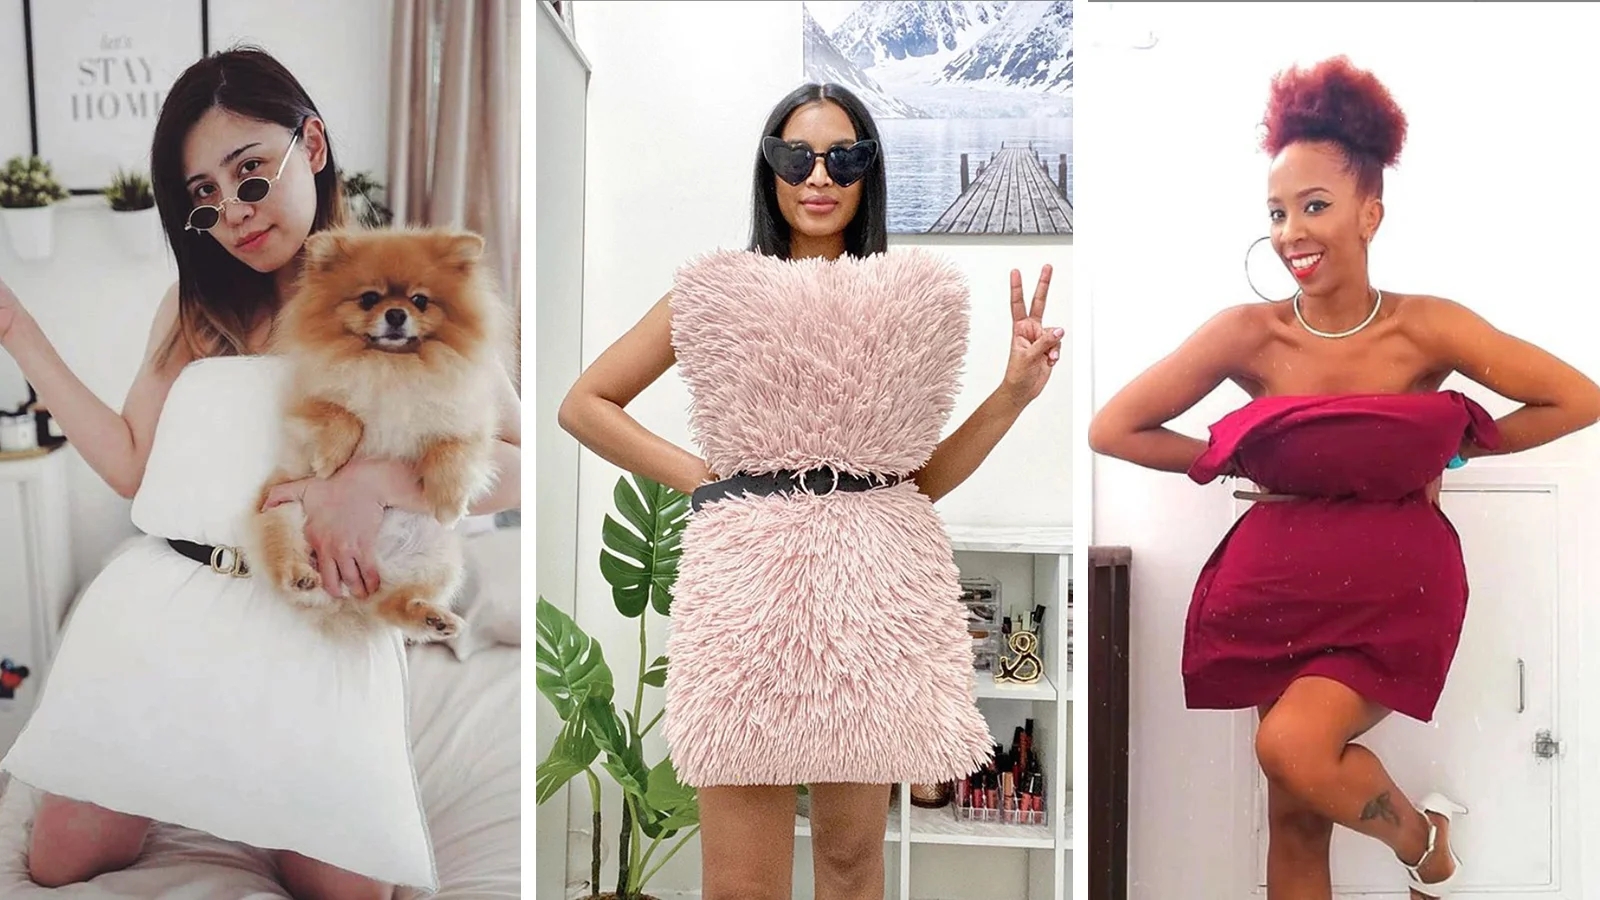 vietnamese and world fashionistas swing social media with pillow challenge quarantined trend